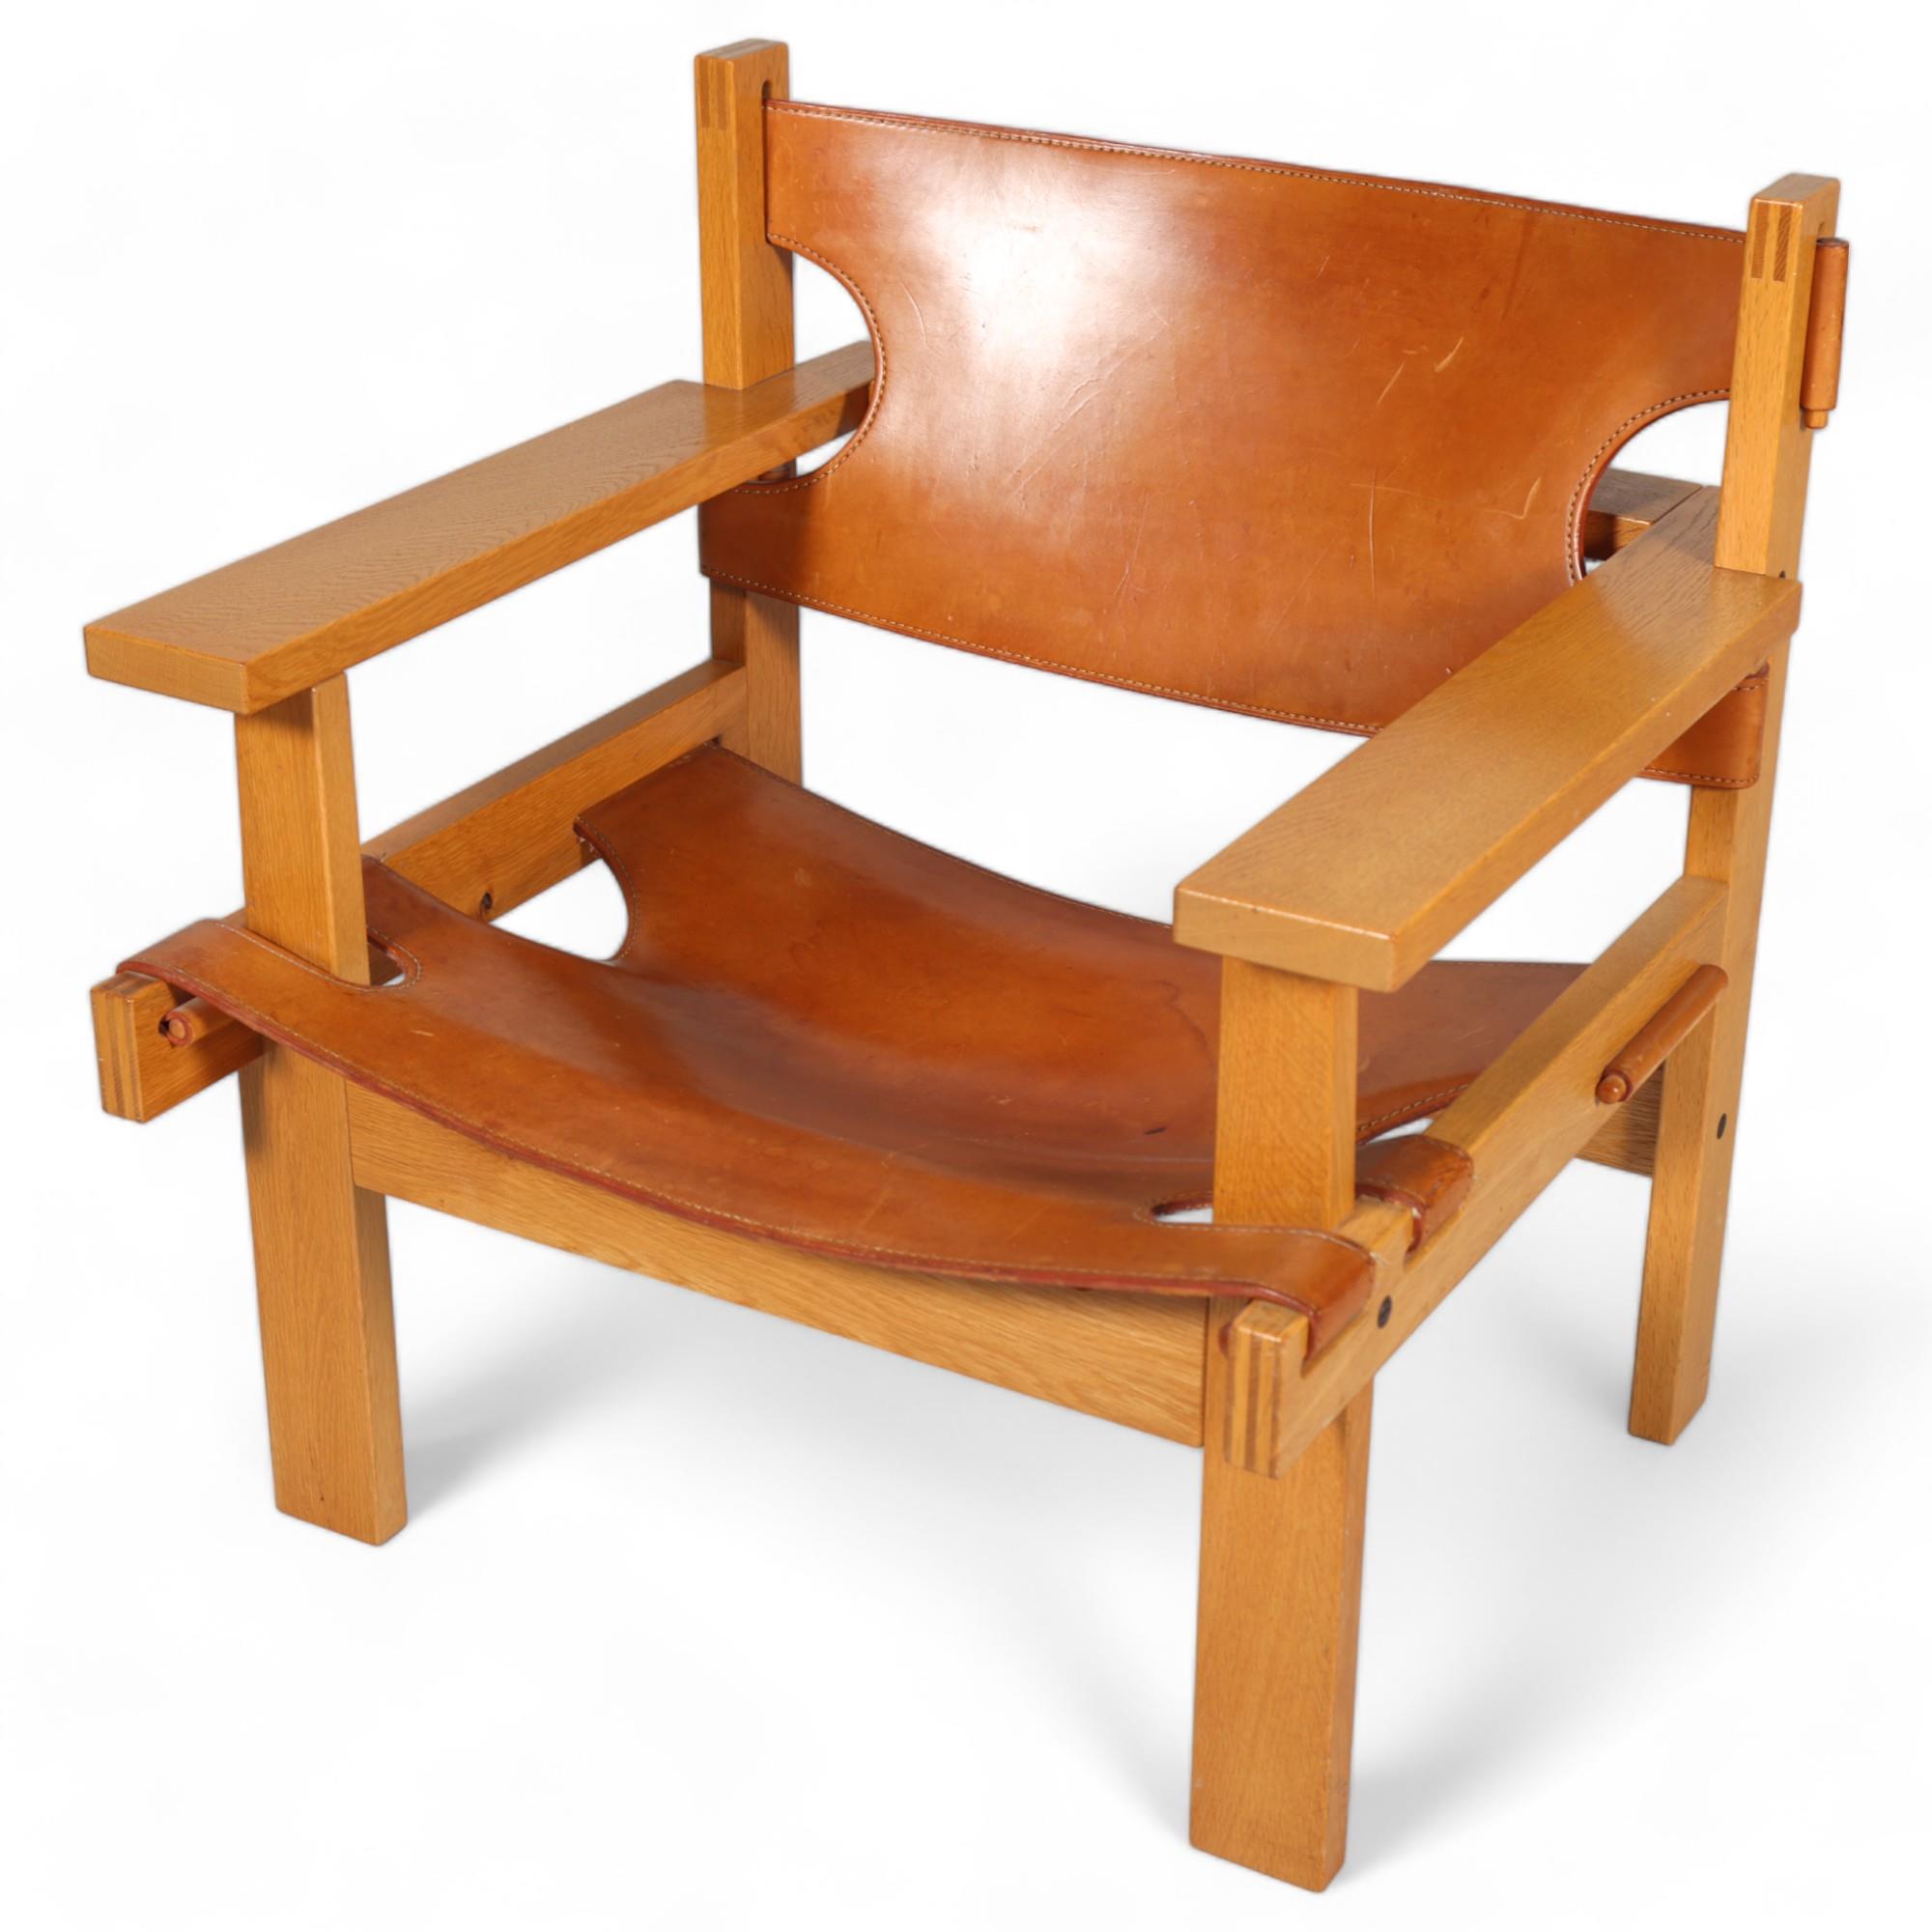 GUNNAR GUDMUNDSSON, a mid-century “Chief” safari style lounge chair in oak with saddle leather sling